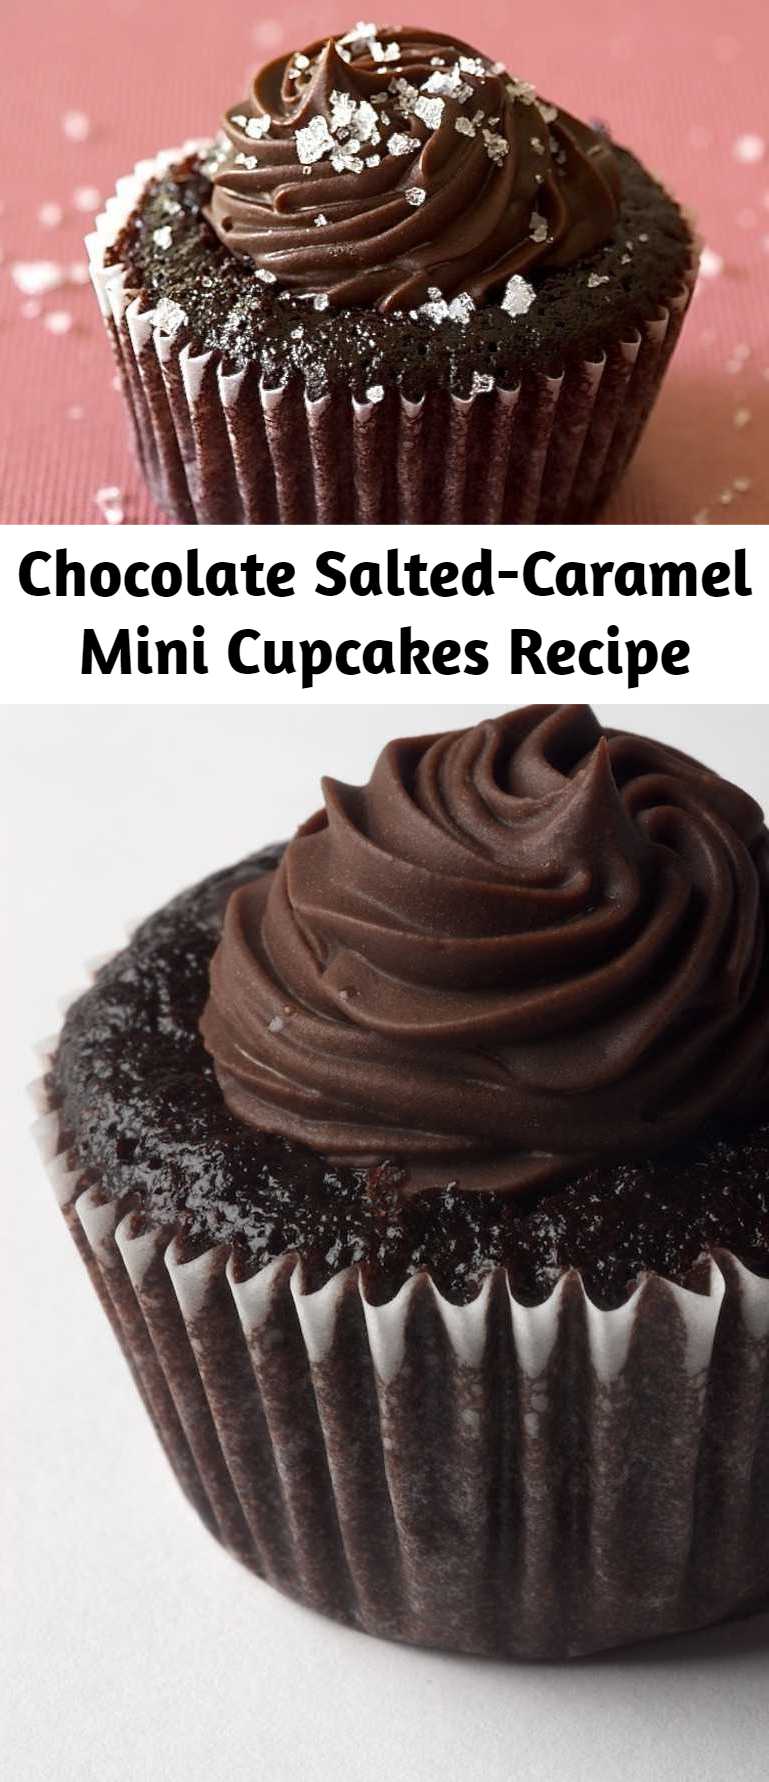 Chocolate Salted-Caramel Mini Cupcakes Recipe - The chocolate cupcakes topped off with that dark chocolate frosting would be enough. Add in the salted caramel filling, and these cupcakes are transformed into something fantastic. They are a bit labor-intensive, but trust me when I say that they are worth every minute.